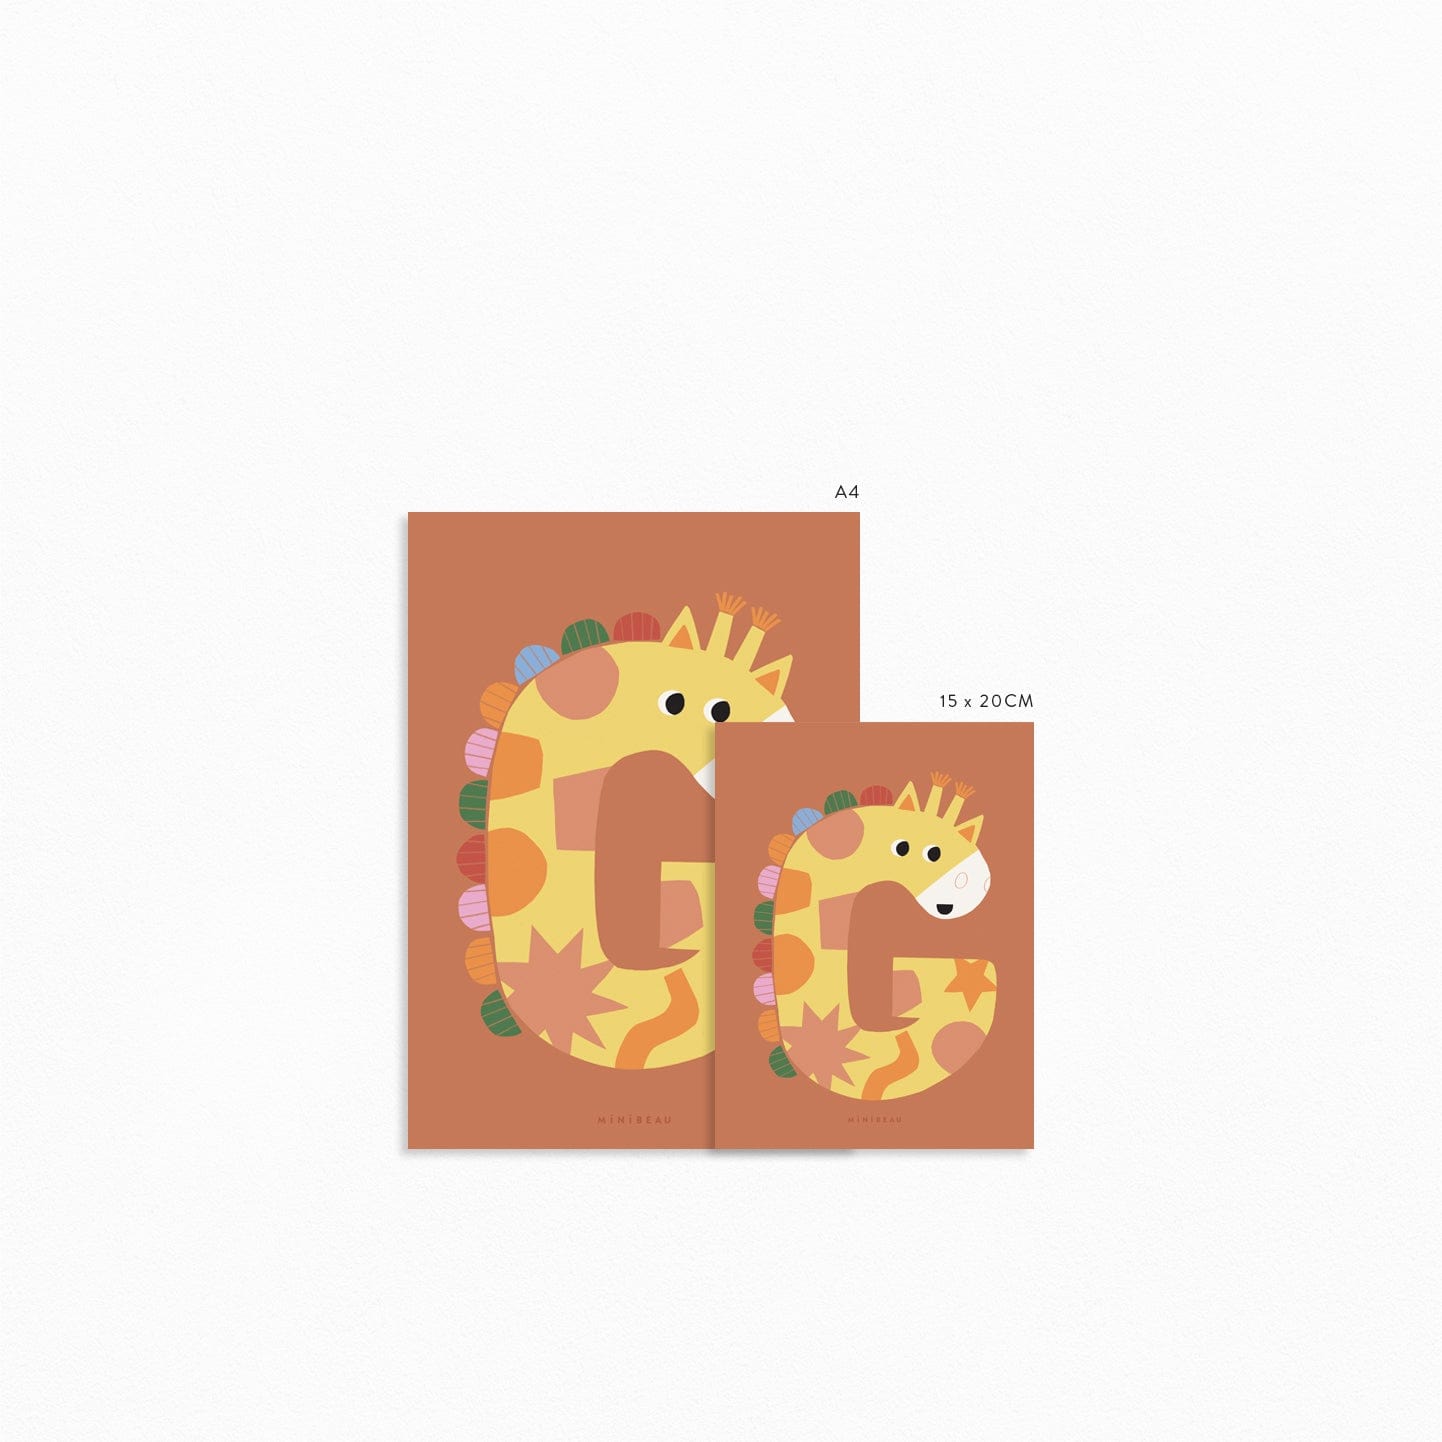 Image to show the available sizes for the Happy Alphabet 'g' art print. Our Happy Alphabet 'G' Art Print shows a smiling giraffe in the shape of a G with a rainbow coloured mane on an orange/rust background.